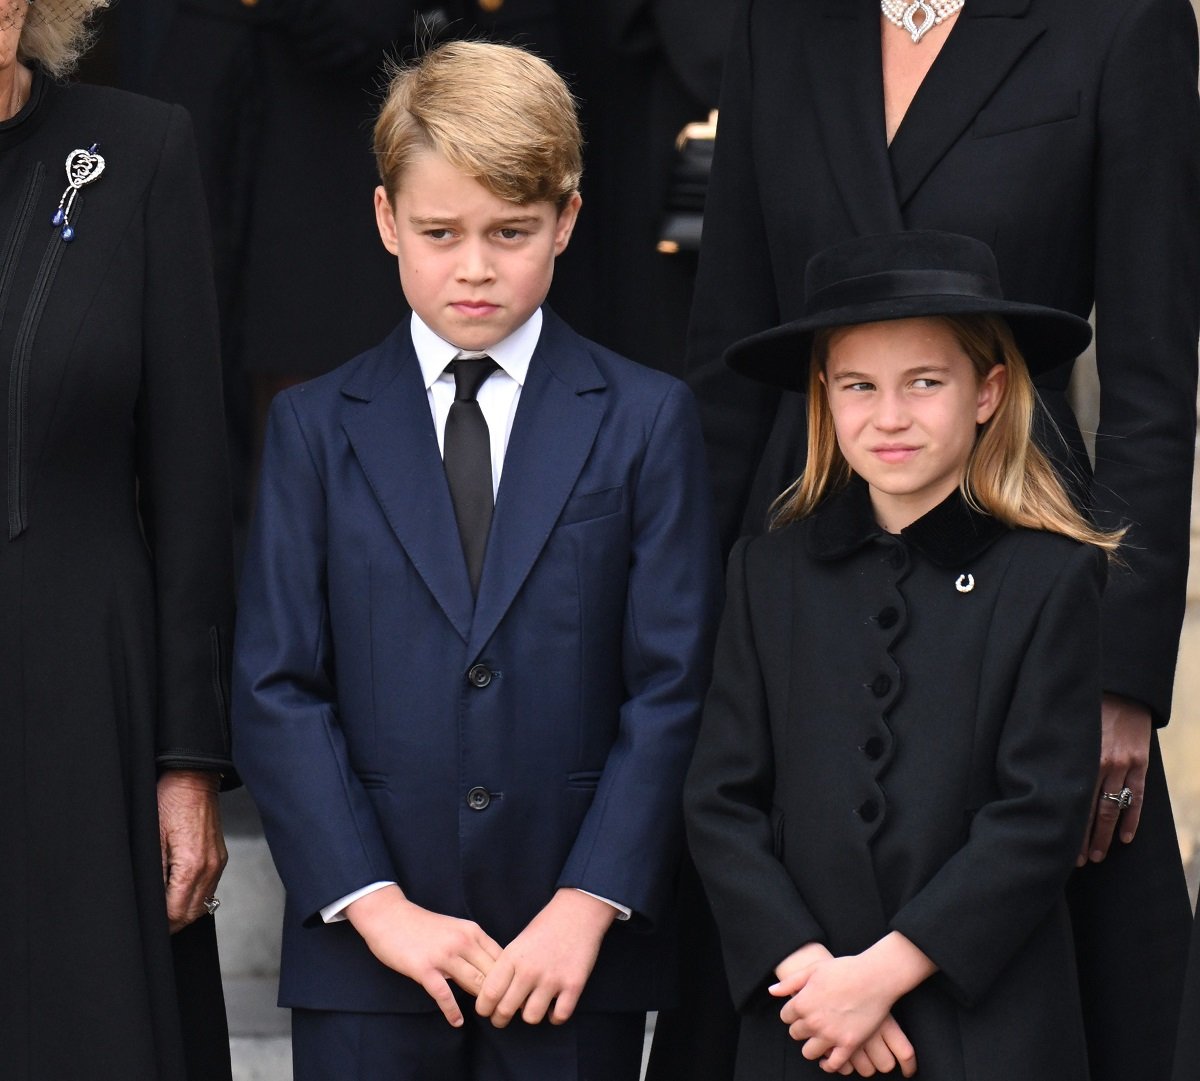 Prince George and Princess Charlotte, who reminded her big brother when to bow, at the queen's funeral, at the State Funeral of their great-grandmother Queen Elizabeth II